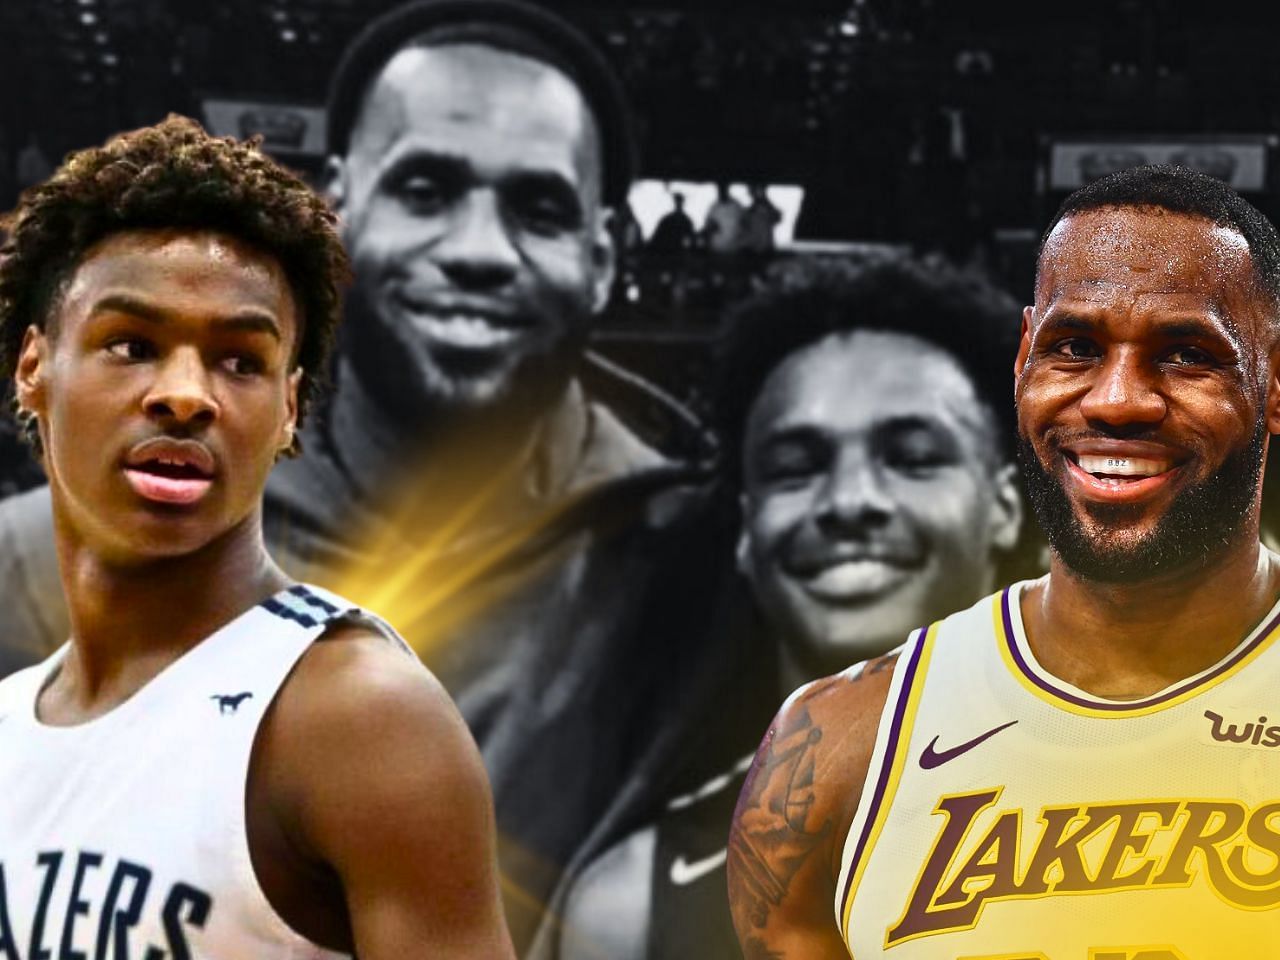 Bronny James received support from fans as LeBron James addresses with a heartfelt tweet